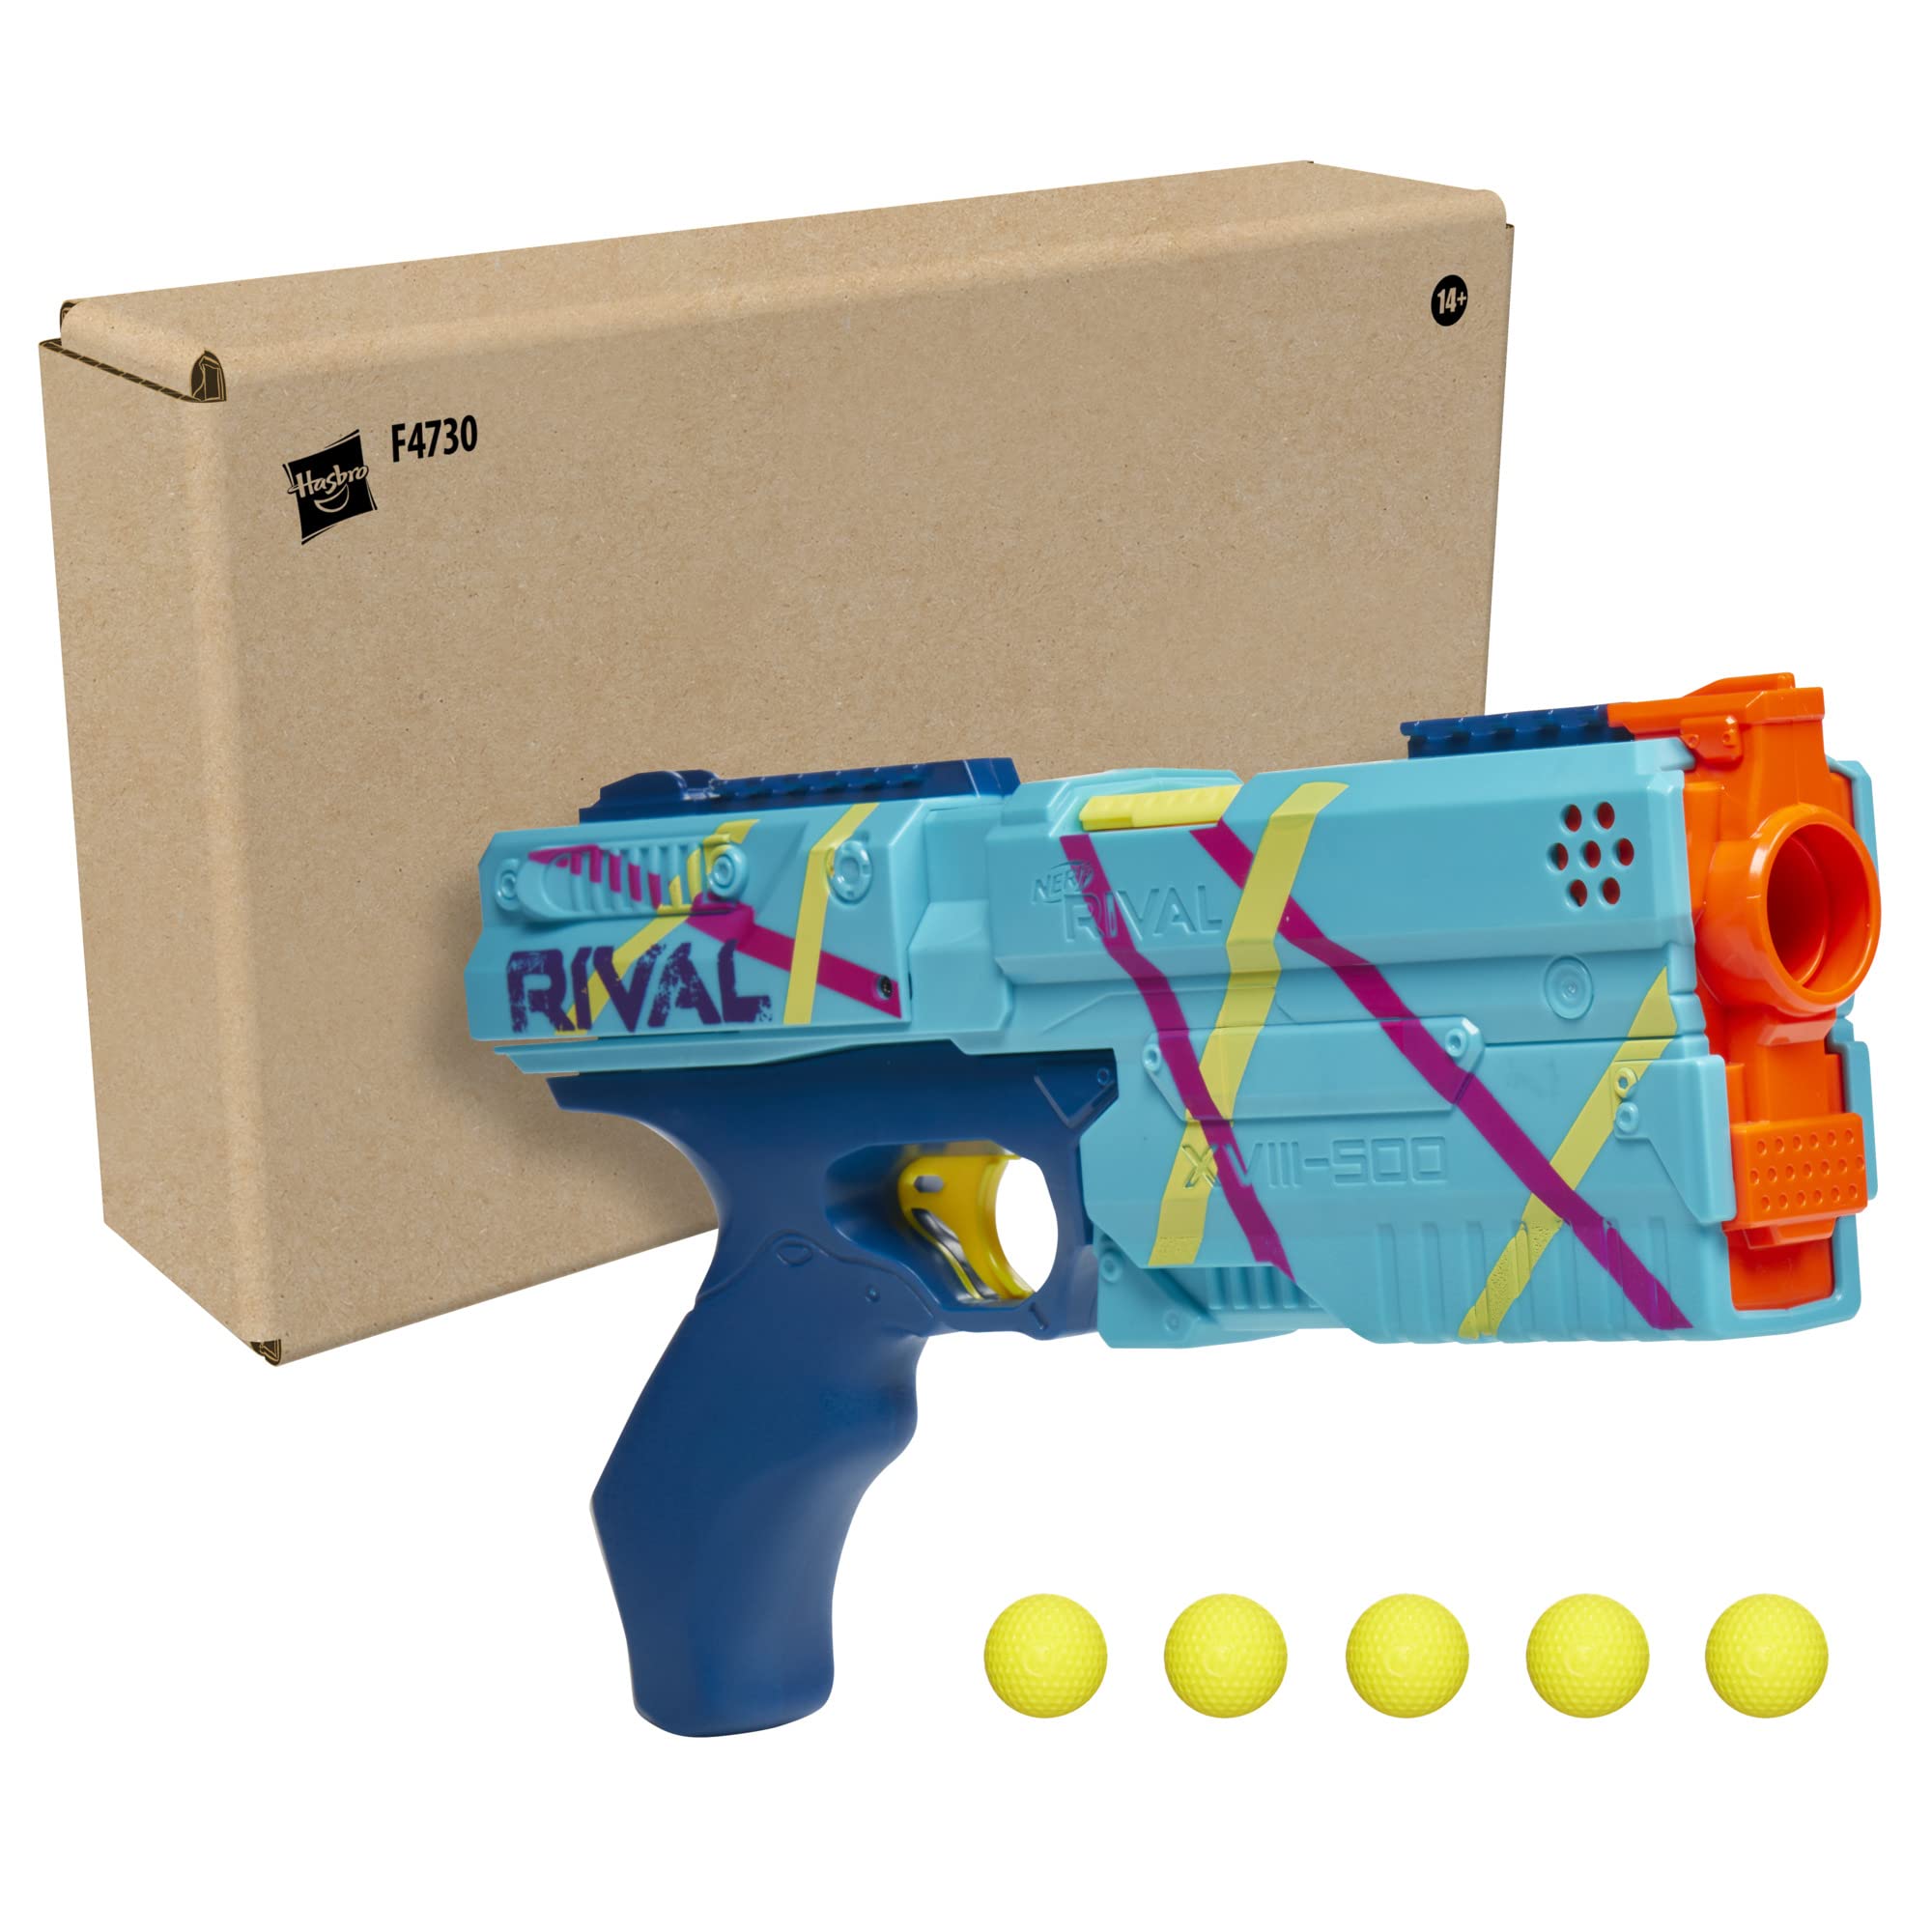 NERF Rival Kronos XVIII-500 Blaster, Breech-Load, 5 Rounds Included $7.97 + Free Shipping w/ Prime or on $35+